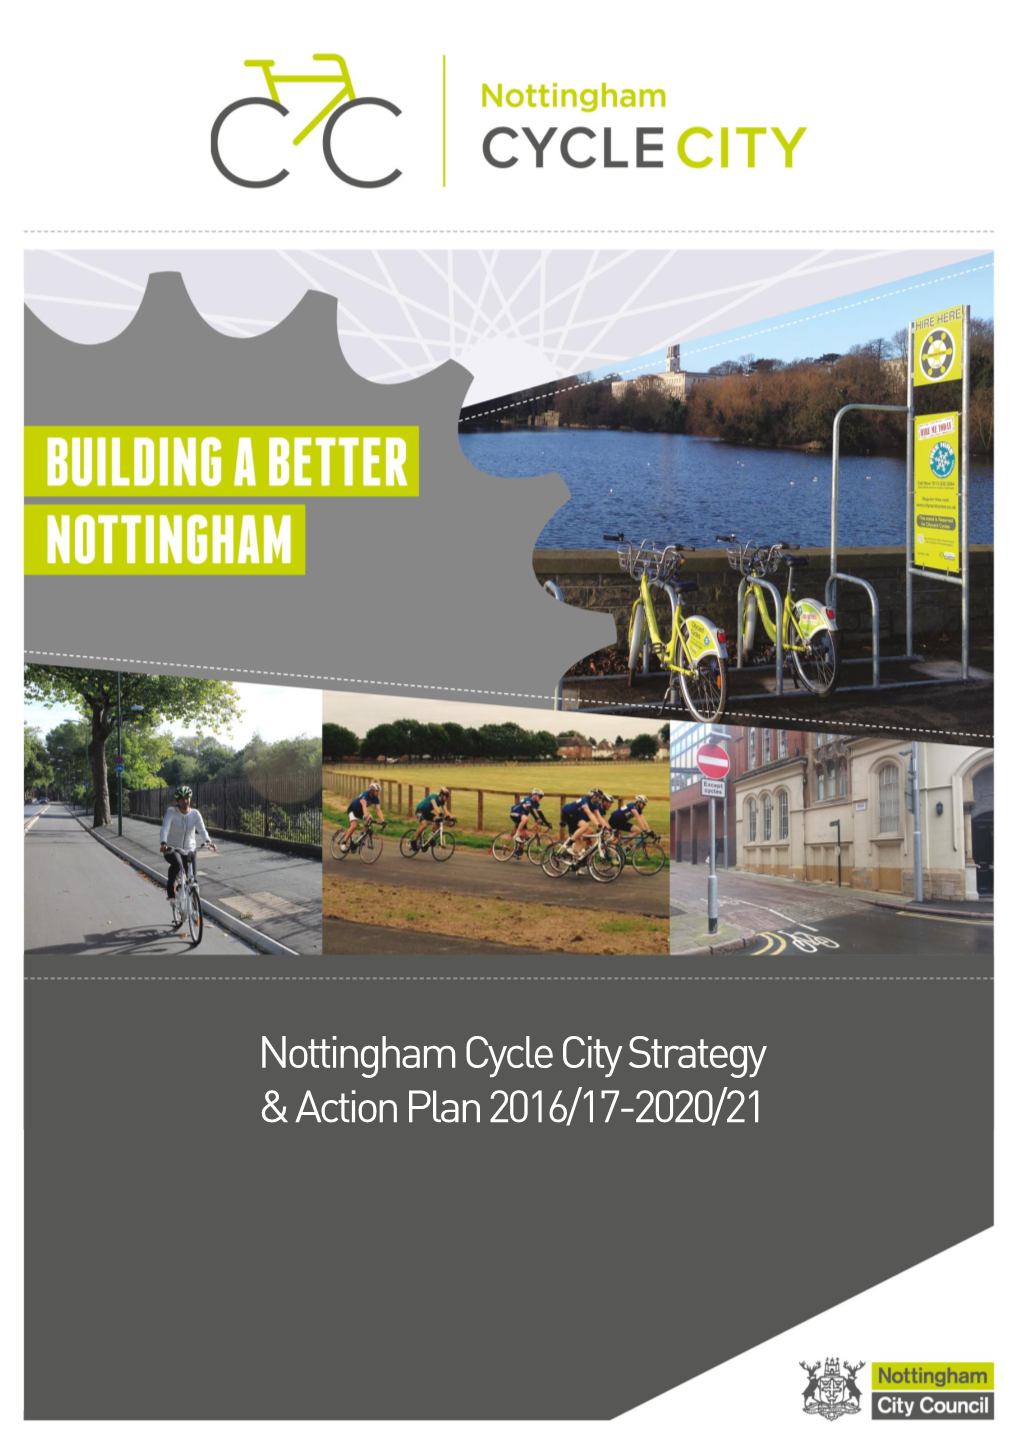 Nottingham Cycle City Strategy & Action Plan 2016/17-2020/21